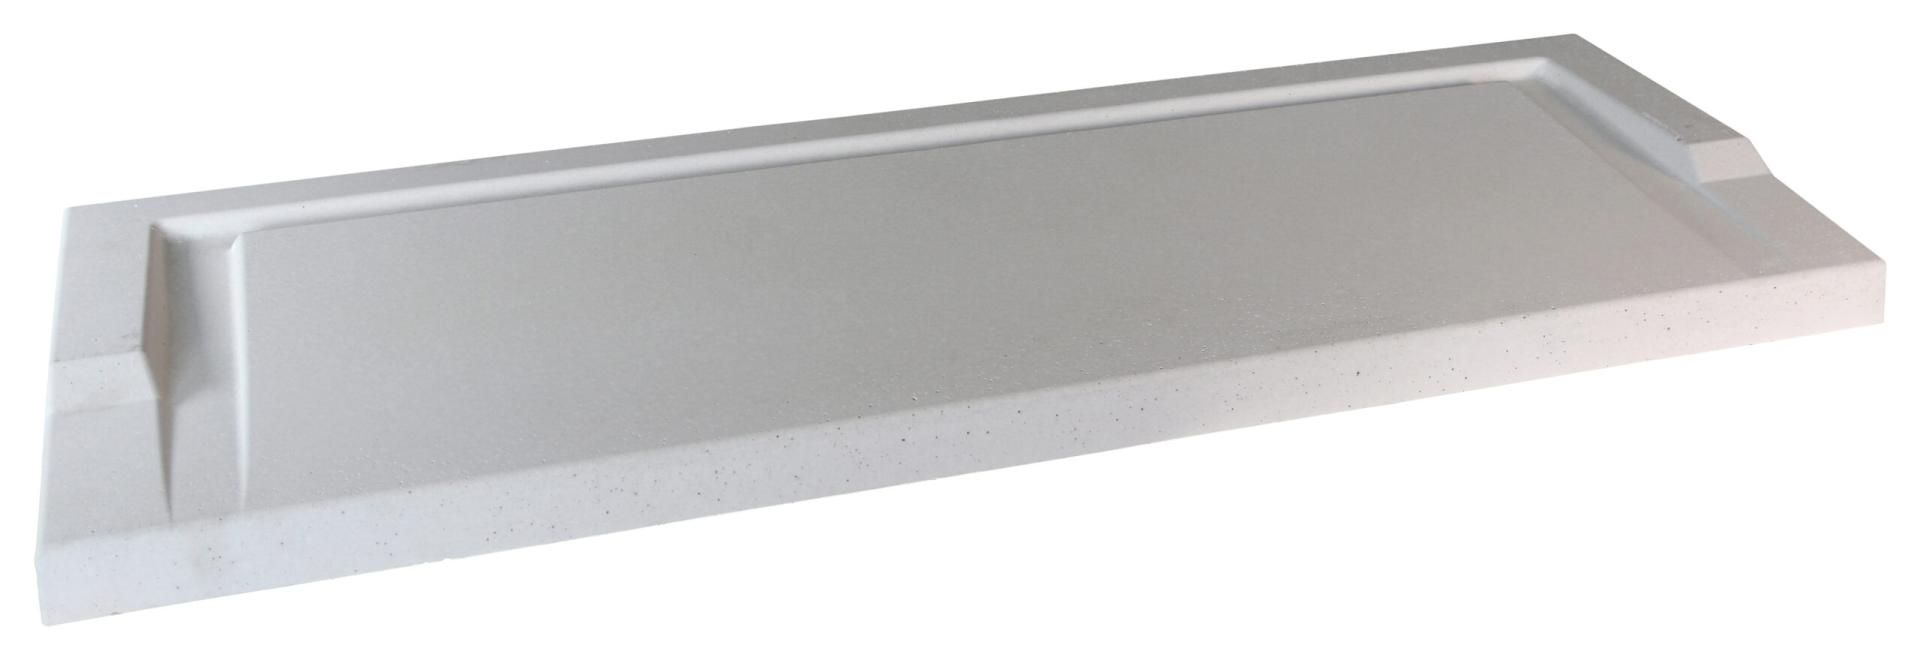 seuil-beton-pmr-lisse-35cm-100-110-daulouede-gris-0